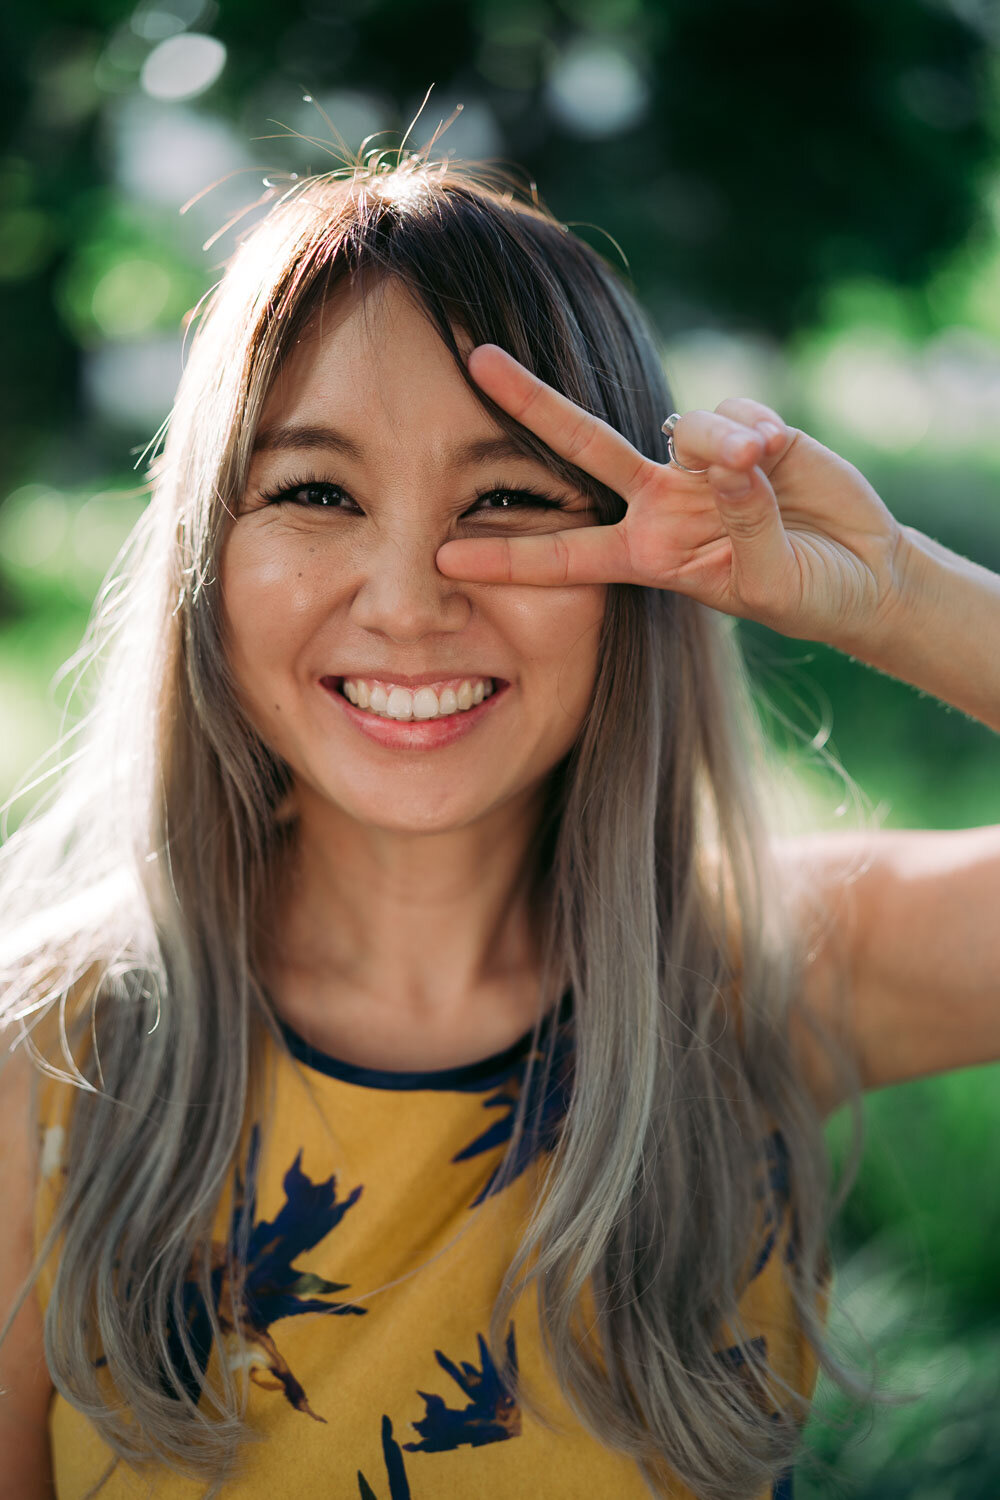 Tokyo headshot photographer | fun, natural and relaxed